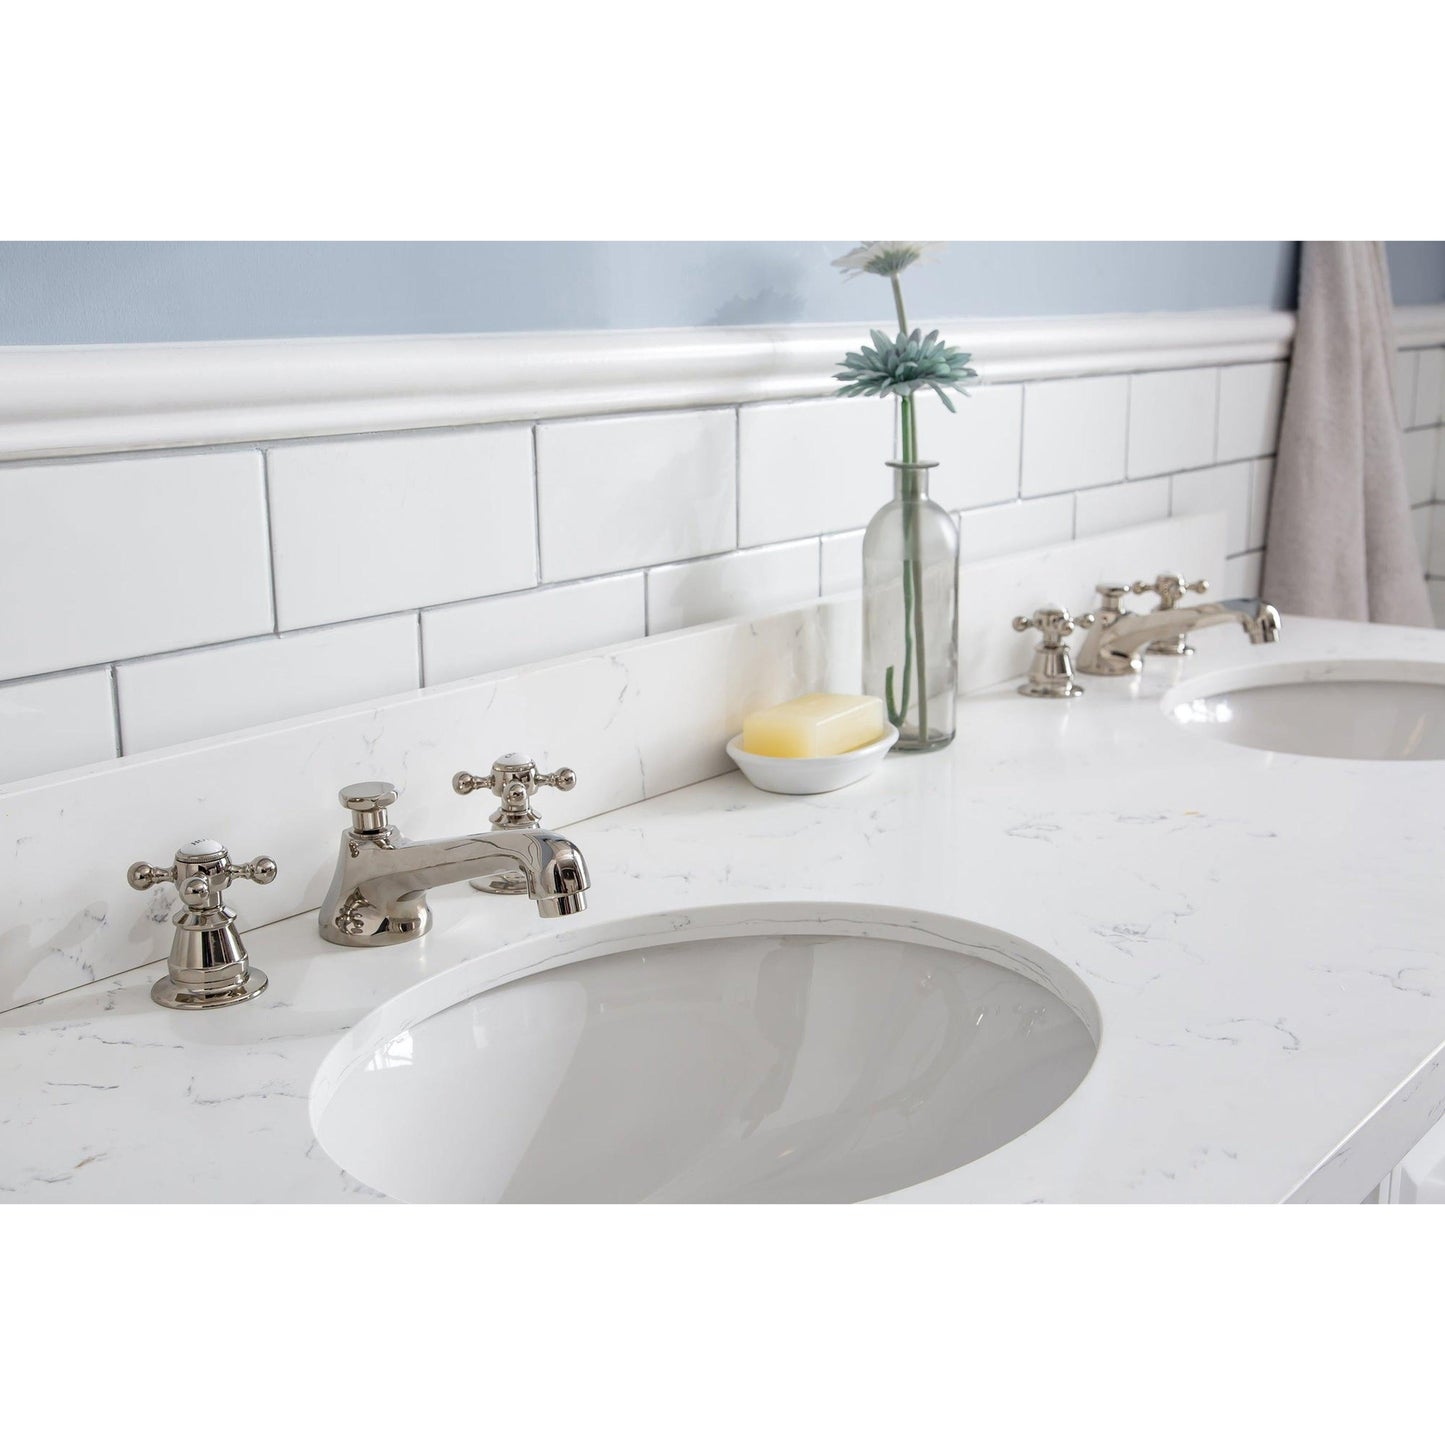 Water Creation Palace 60" Quartz Carrara Pure White Bathroom Vanity Set With Hardware And F2-0009 Faucets, Mirror in Polished Nickel (PVD) Finish